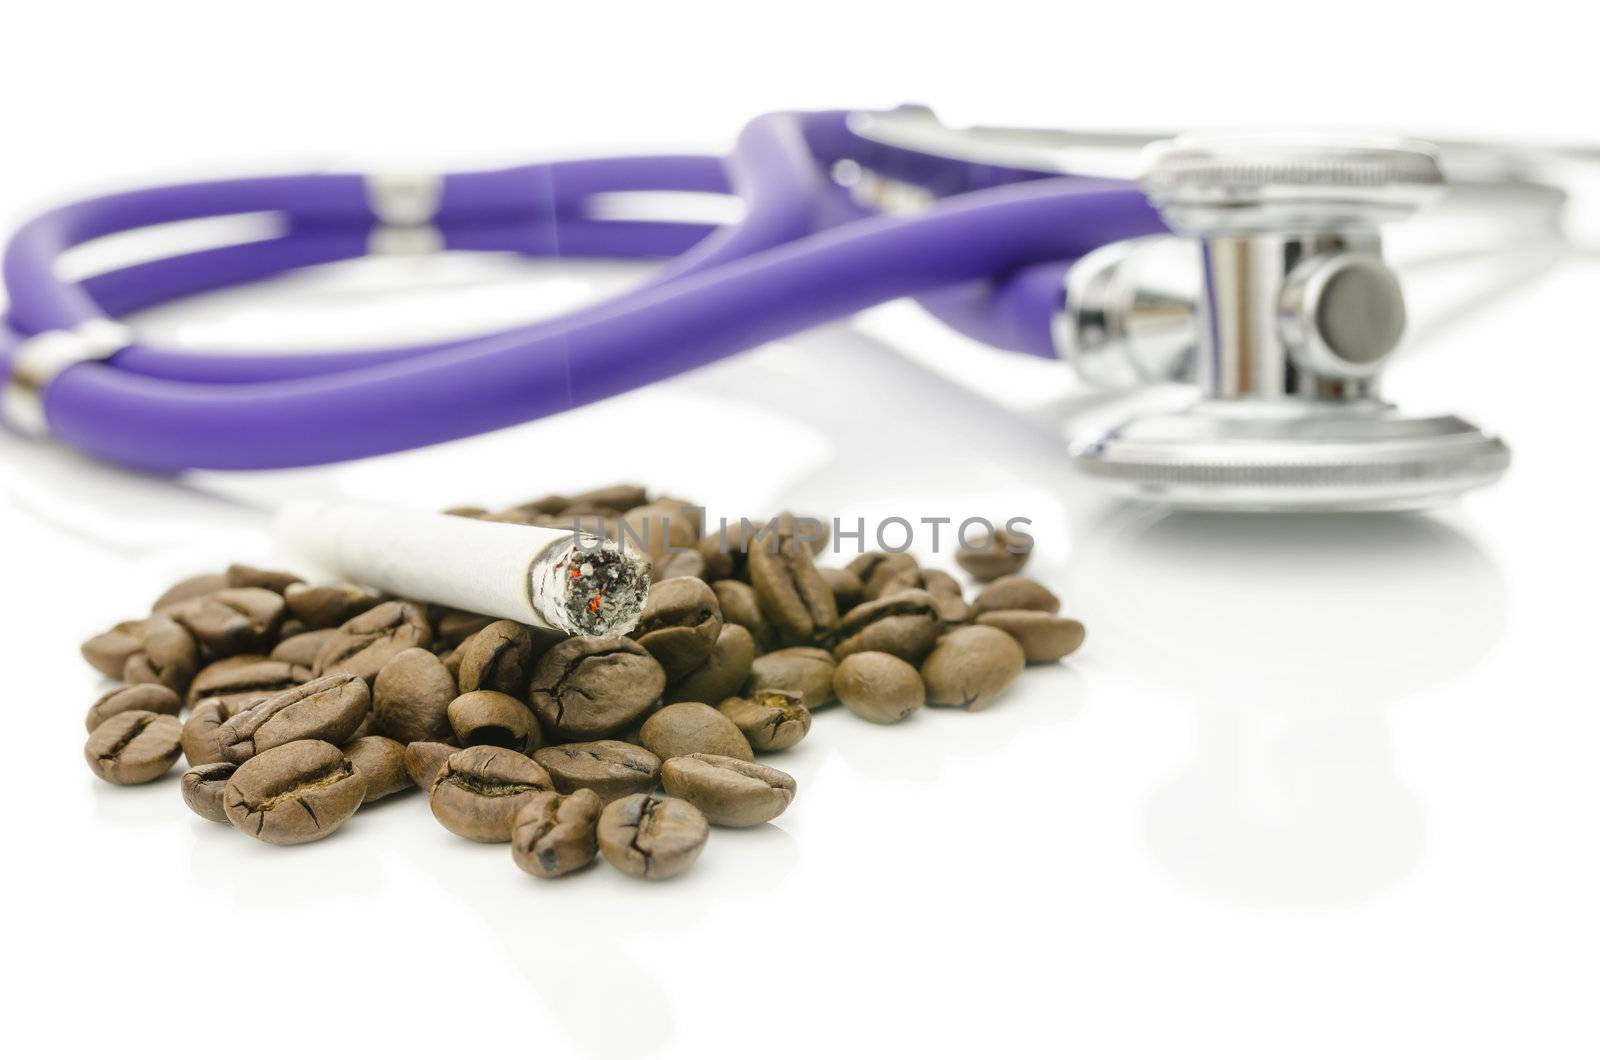 Cigarette on coffee beans with stethoscope in background. Addiction concept.